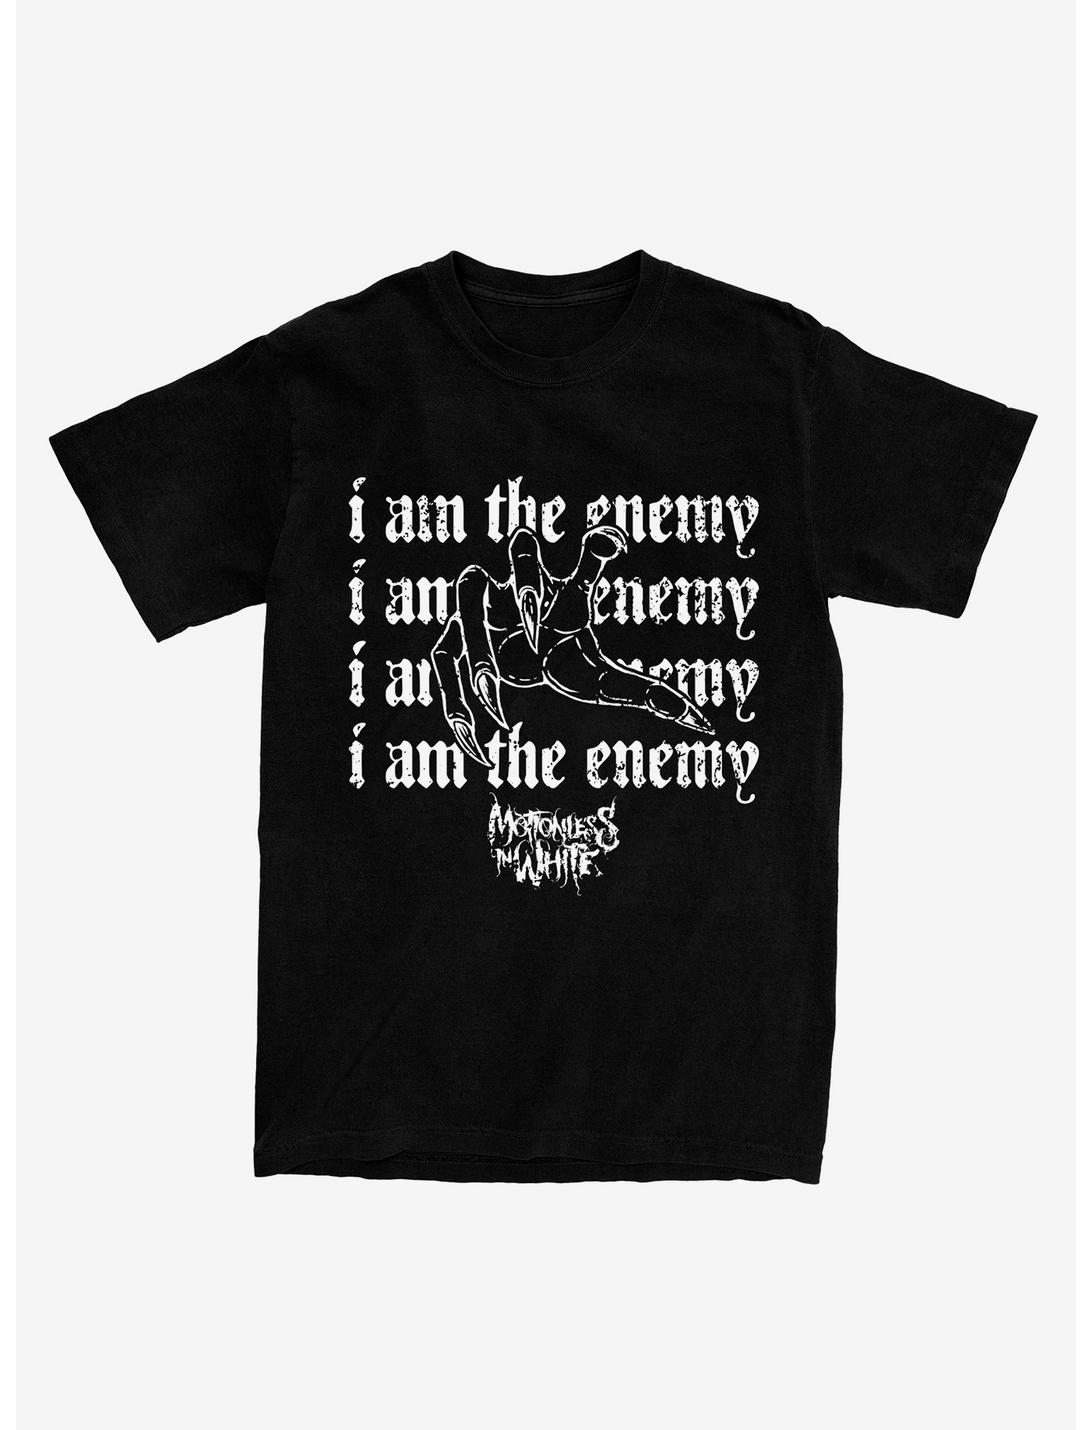 Motionless In White I Am The Enemy Girls T-Shirt, BLACK, hi-res